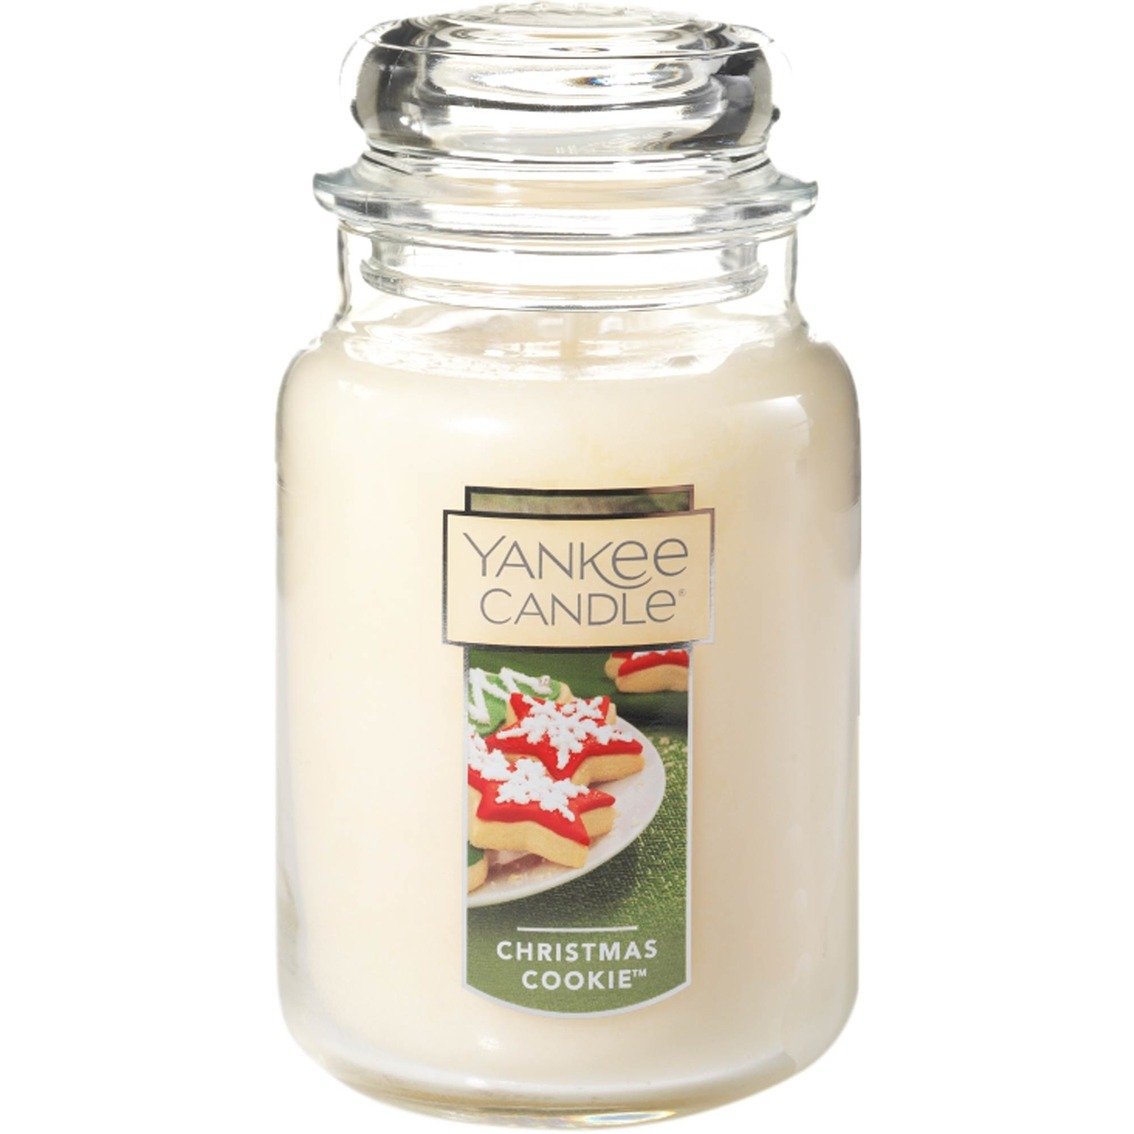 Yankee Candle Christmas Cookie Large Jar Candle